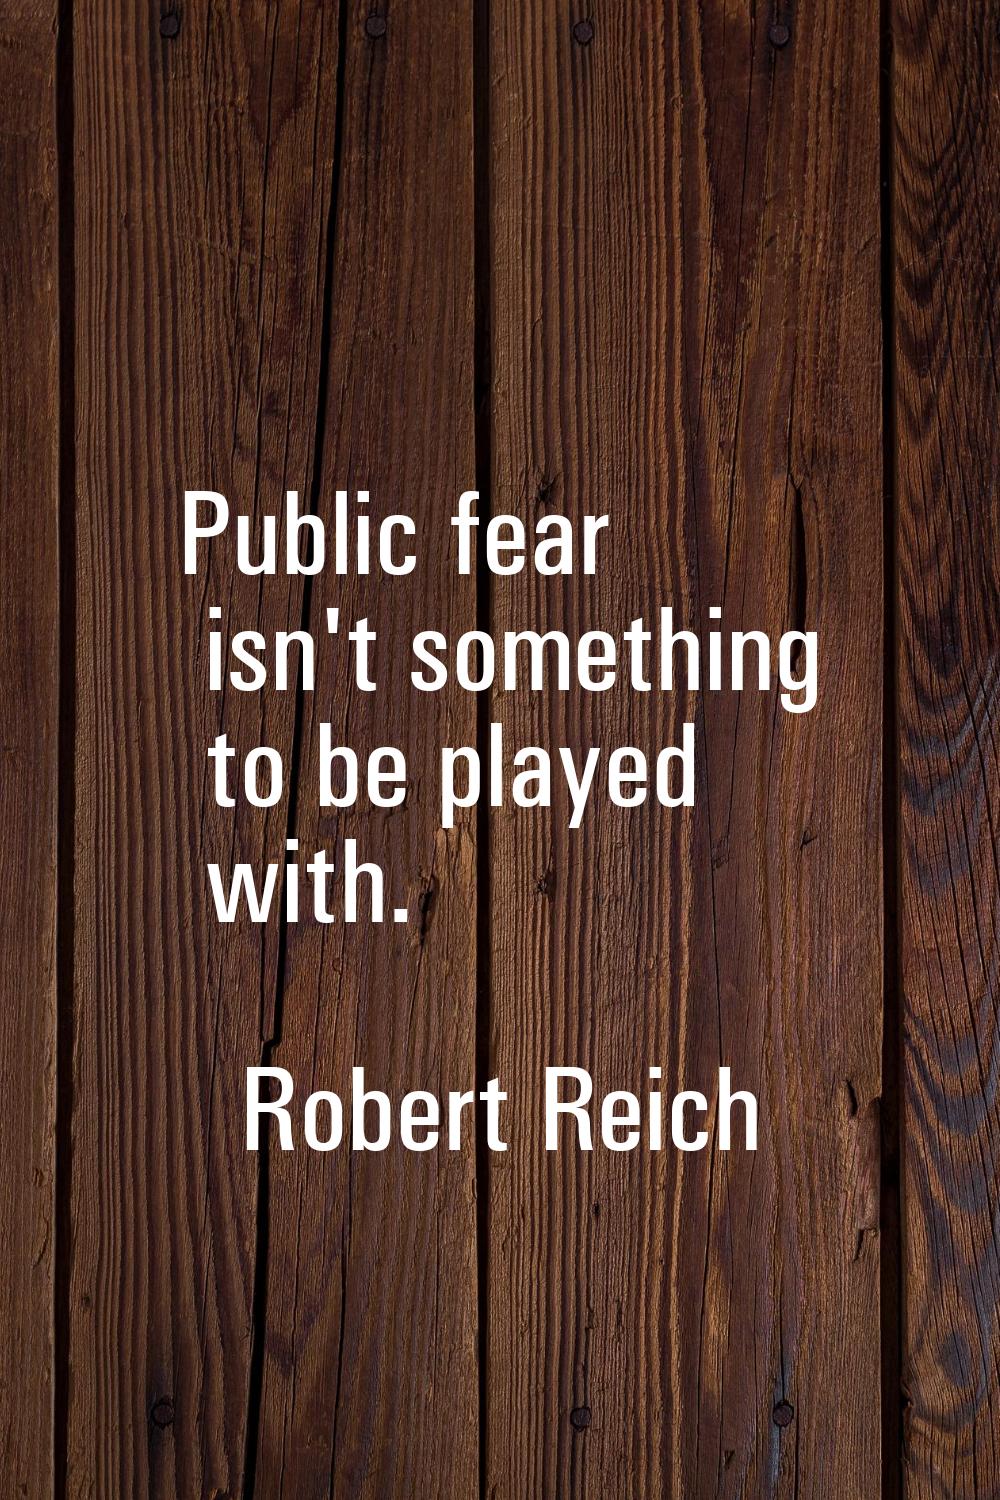 Public fear isn't something to be played with.